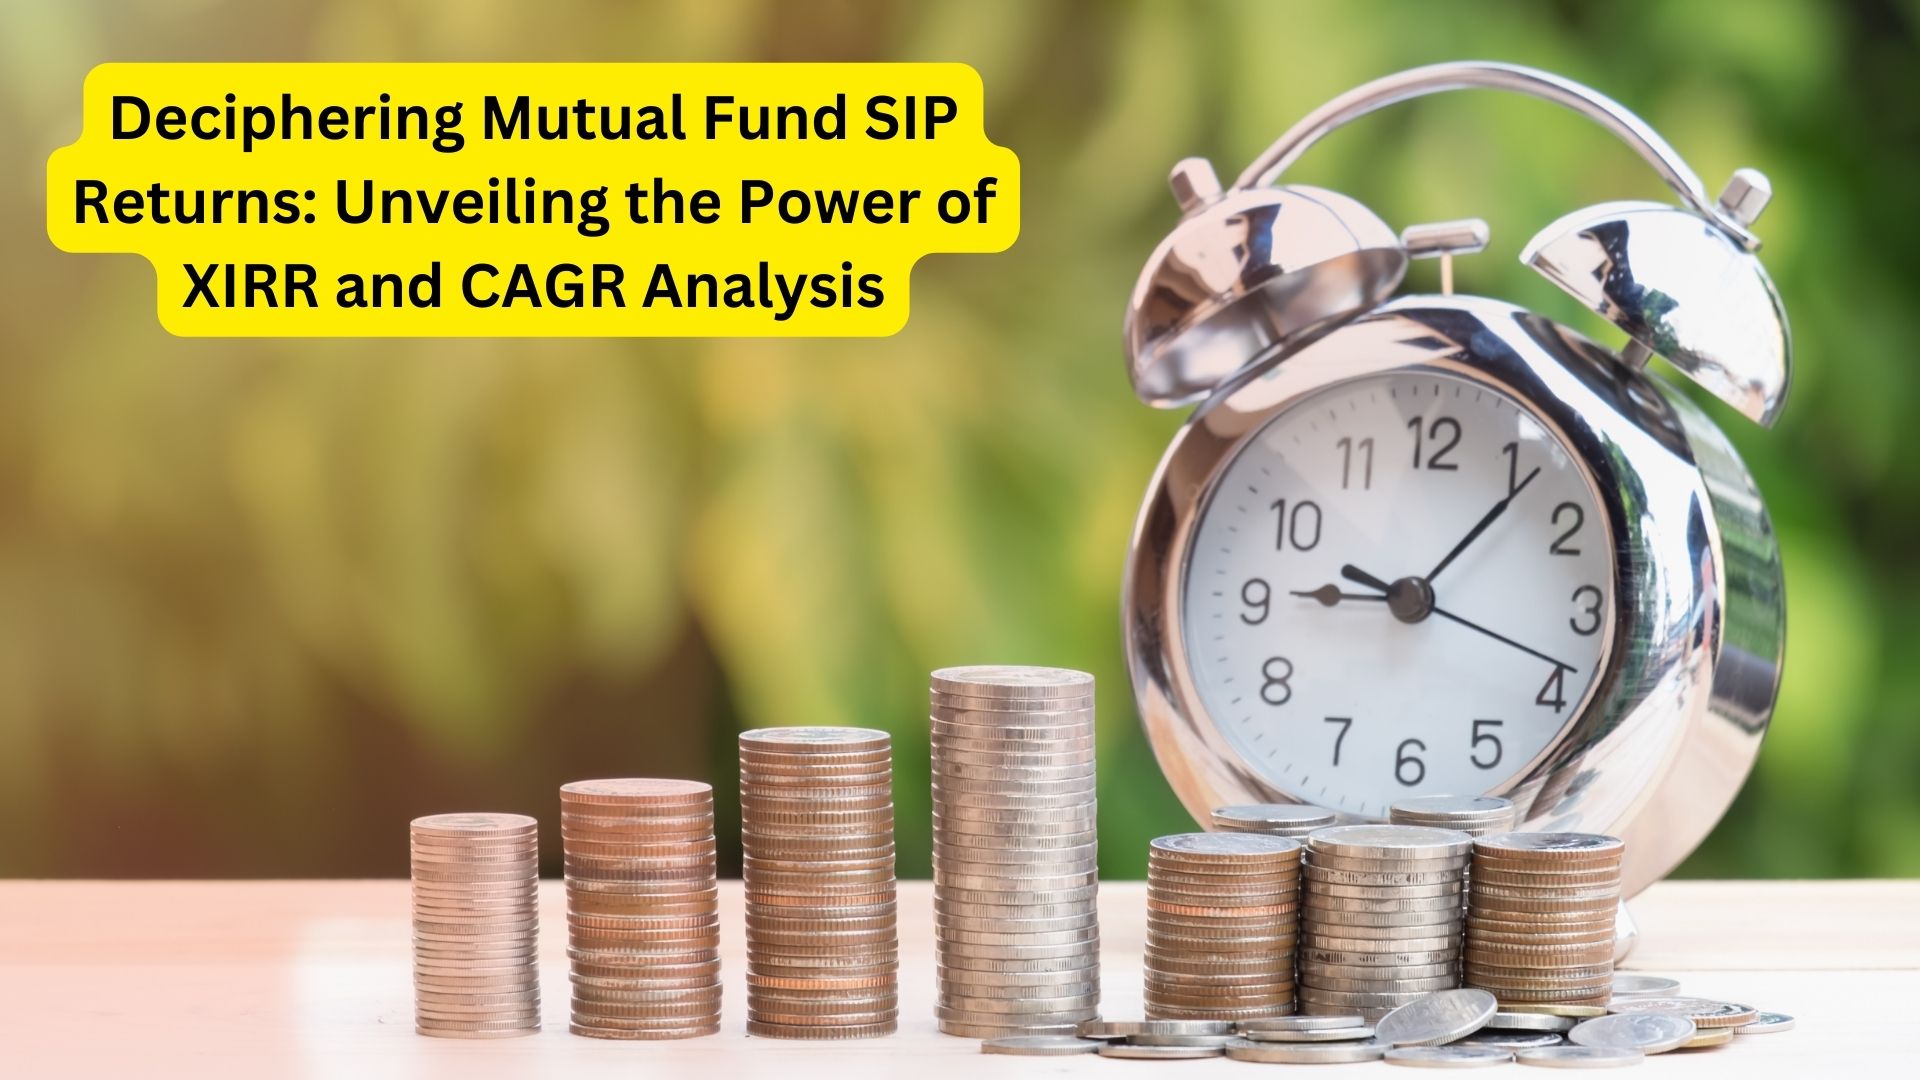 Deciphering Mutual Fund SIP Returns: Unveiling the Power of XIRR and CAGR Analysis